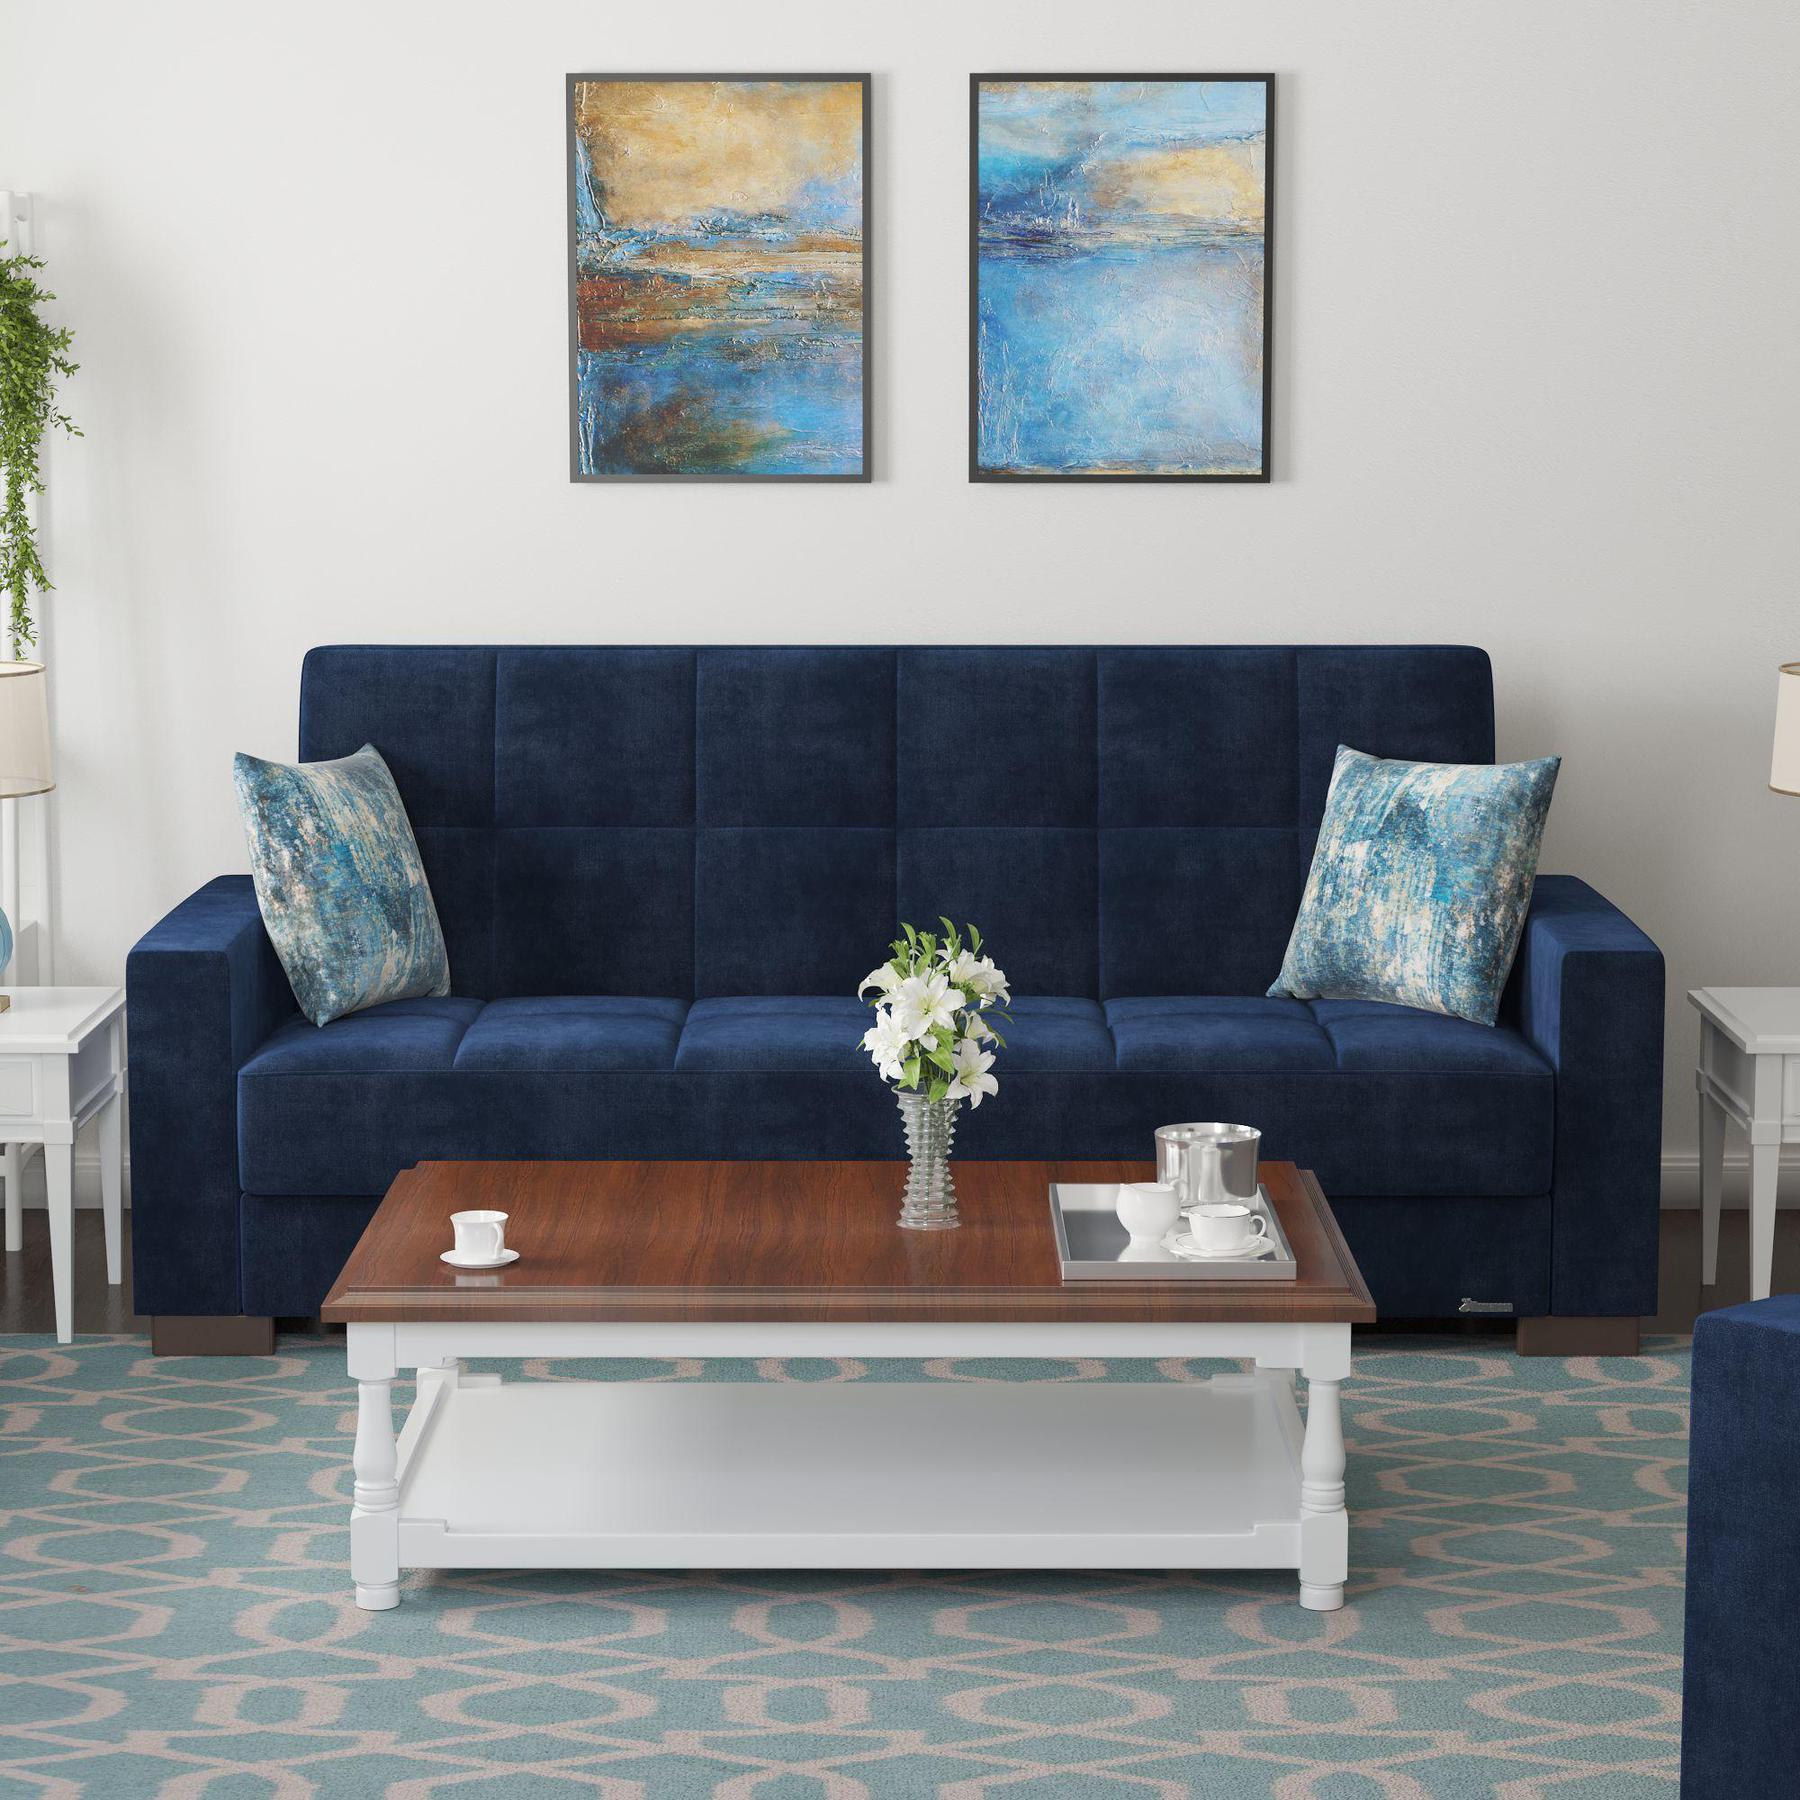 Modern design, True Blue , Microfiber upholstered convertible sleeper Sofabed with underseat storage from Voyage Track by Ottomanson in living room lifestyle setting by itself. This Sofabed measures 90 inches width by 36 inches depth by 41 inches height.